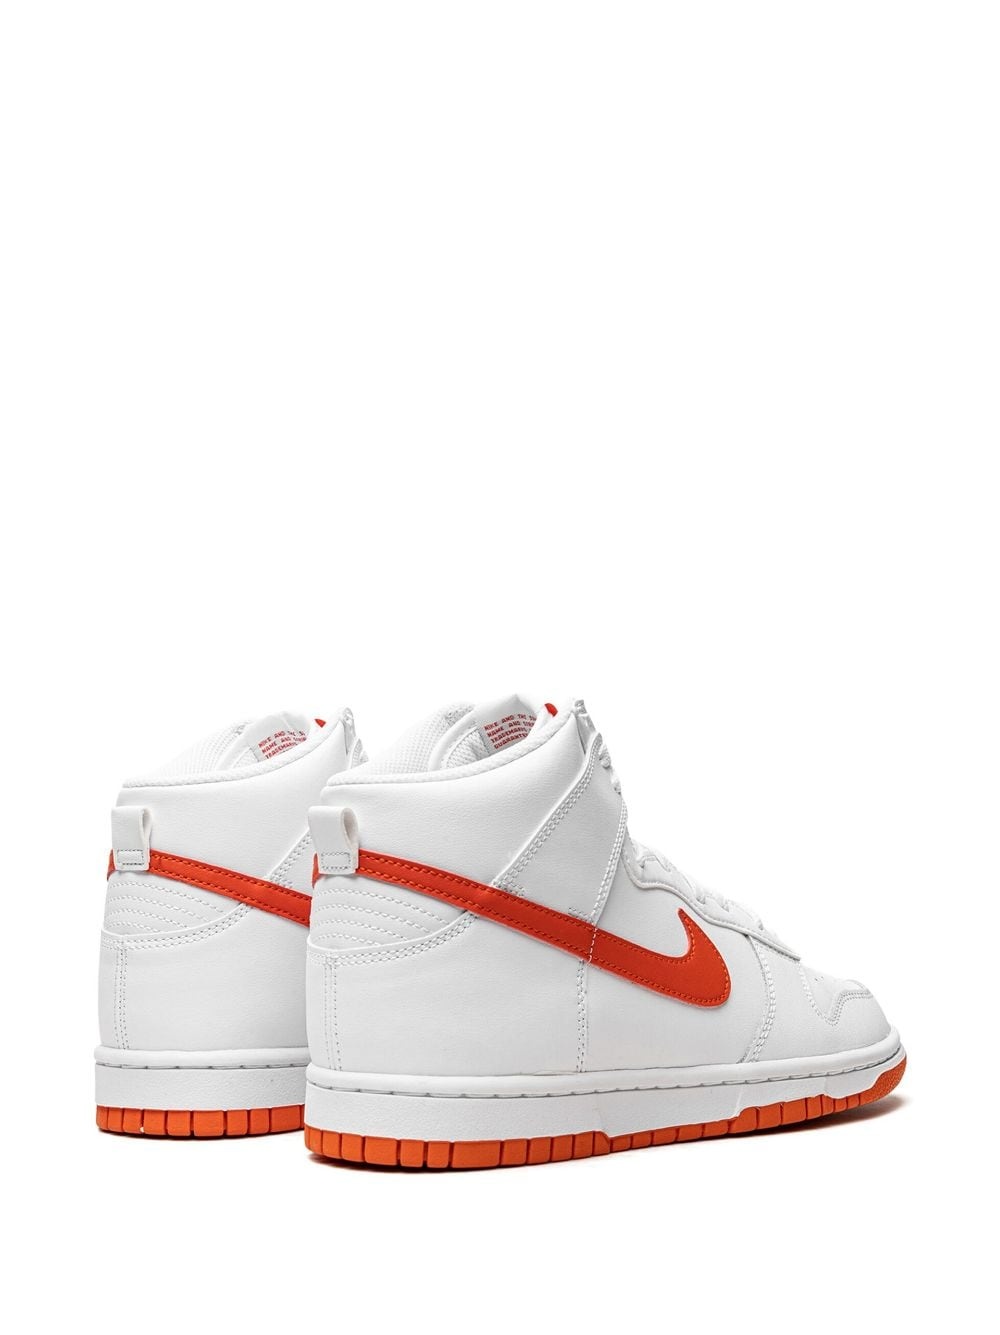 Dunk High "Picante Red" sneakers - 3